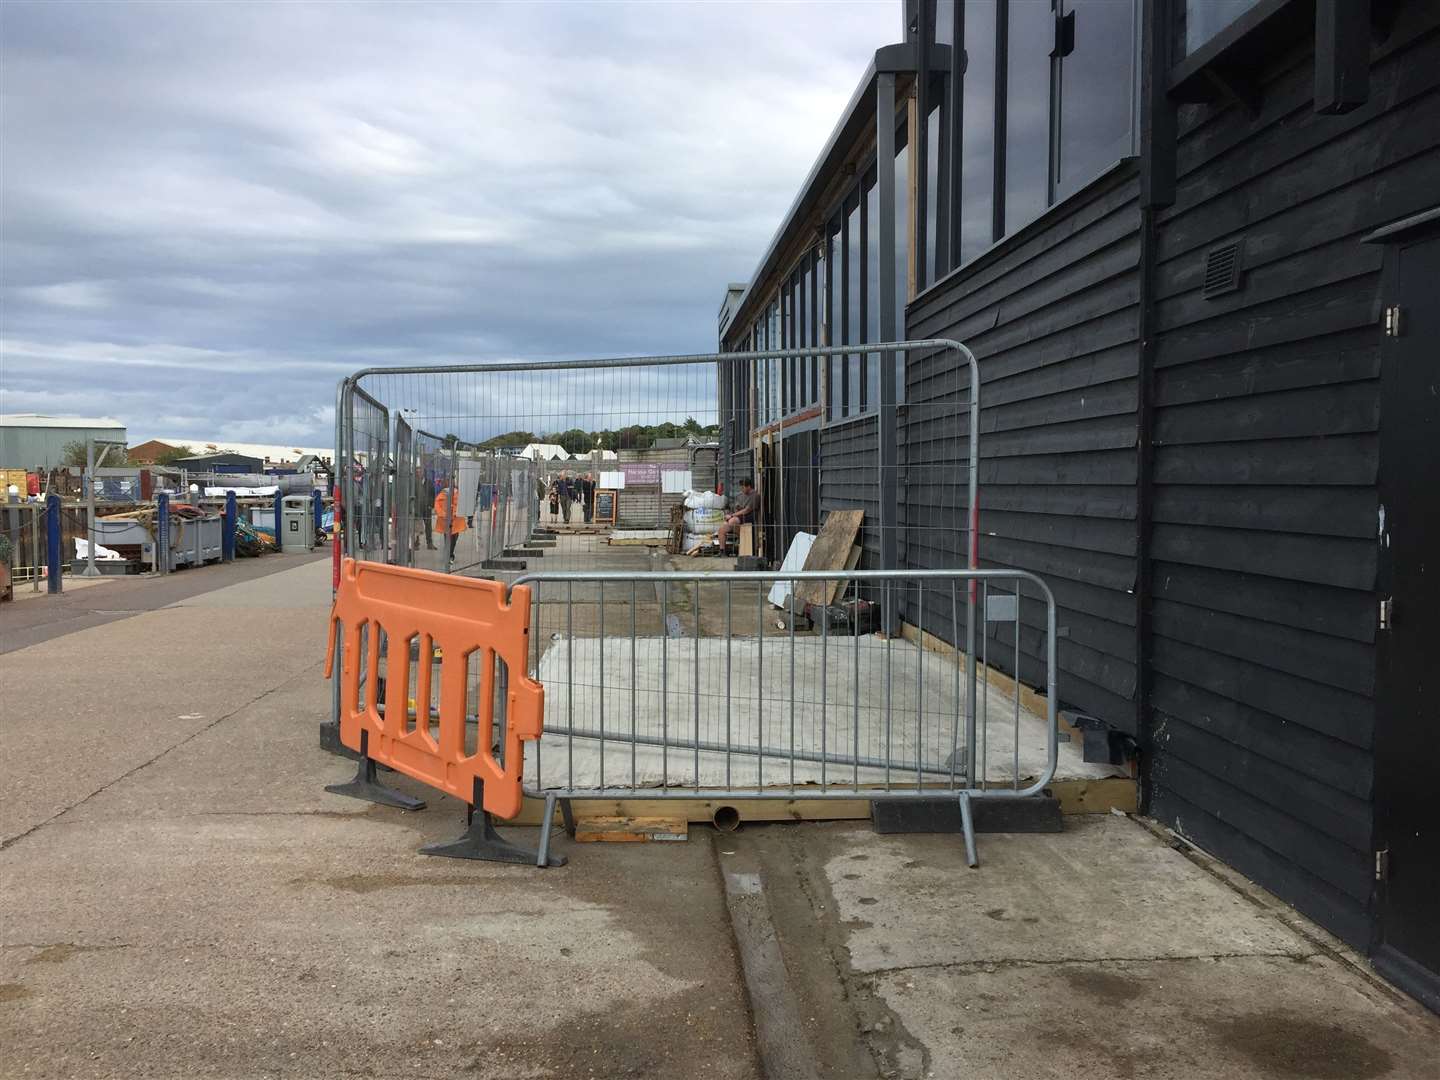 The South Quay Shed with one of the plots for kiosks in Whitstable Harbour